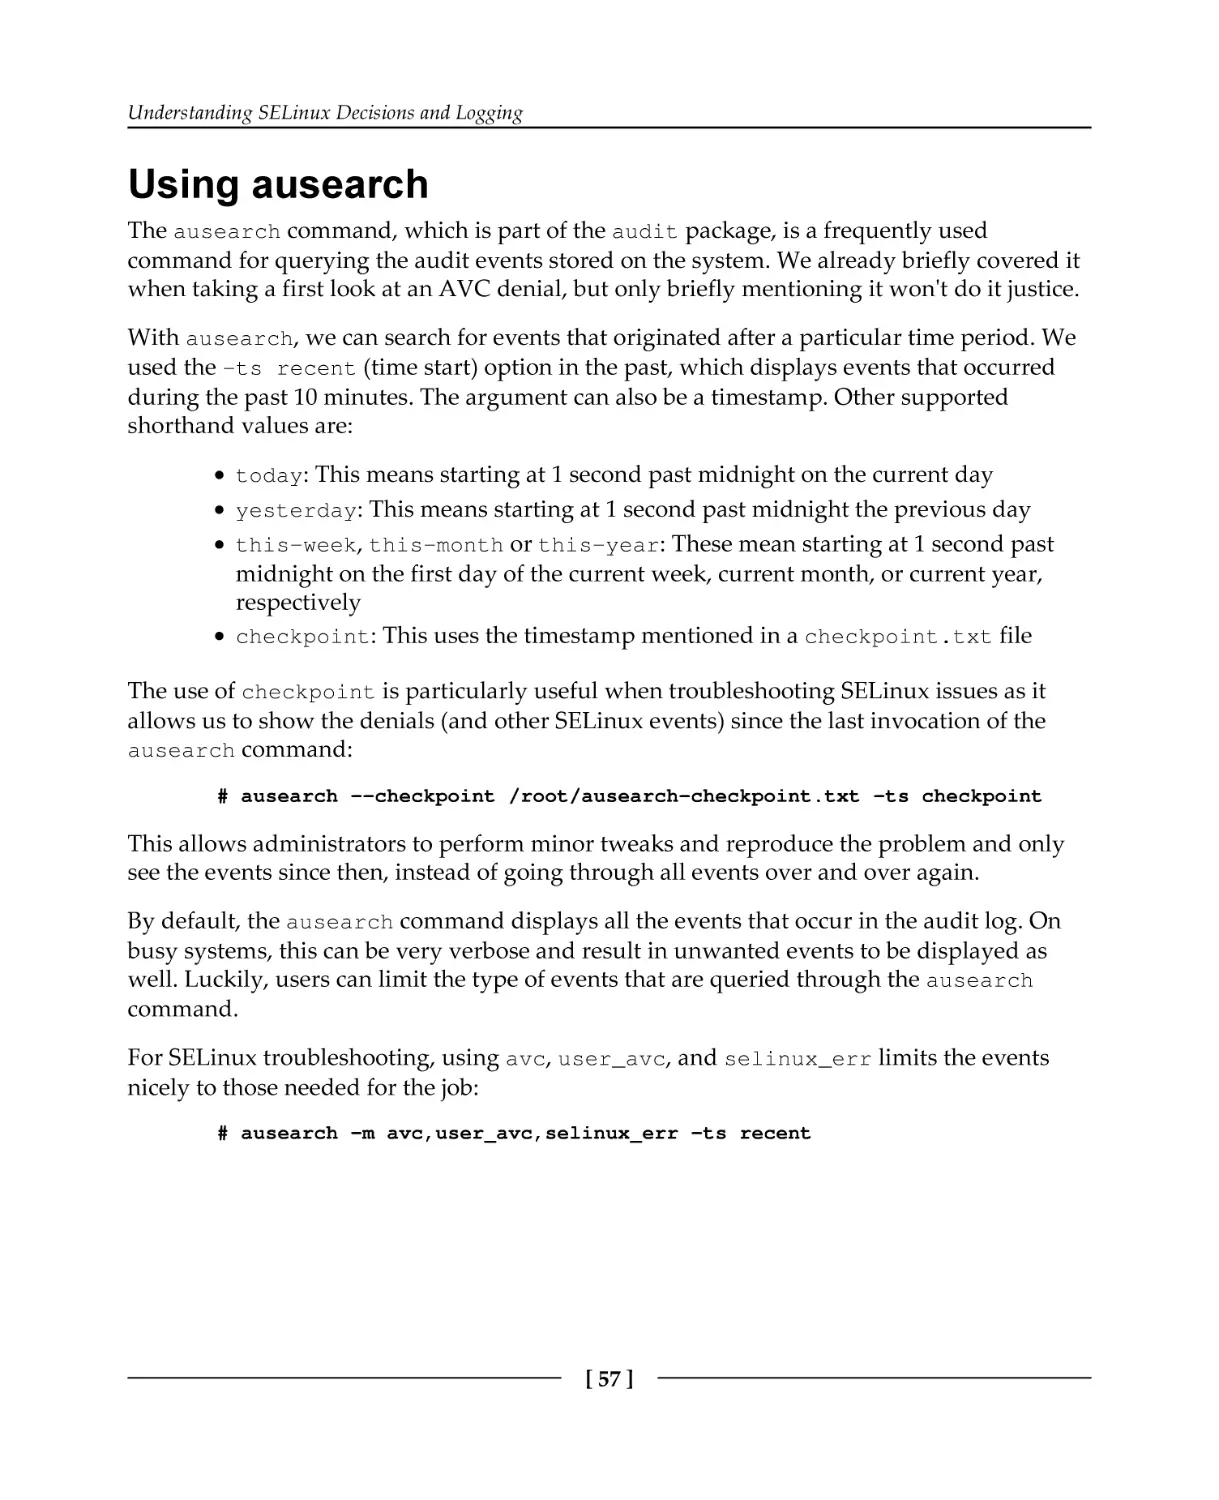 Using ausearch